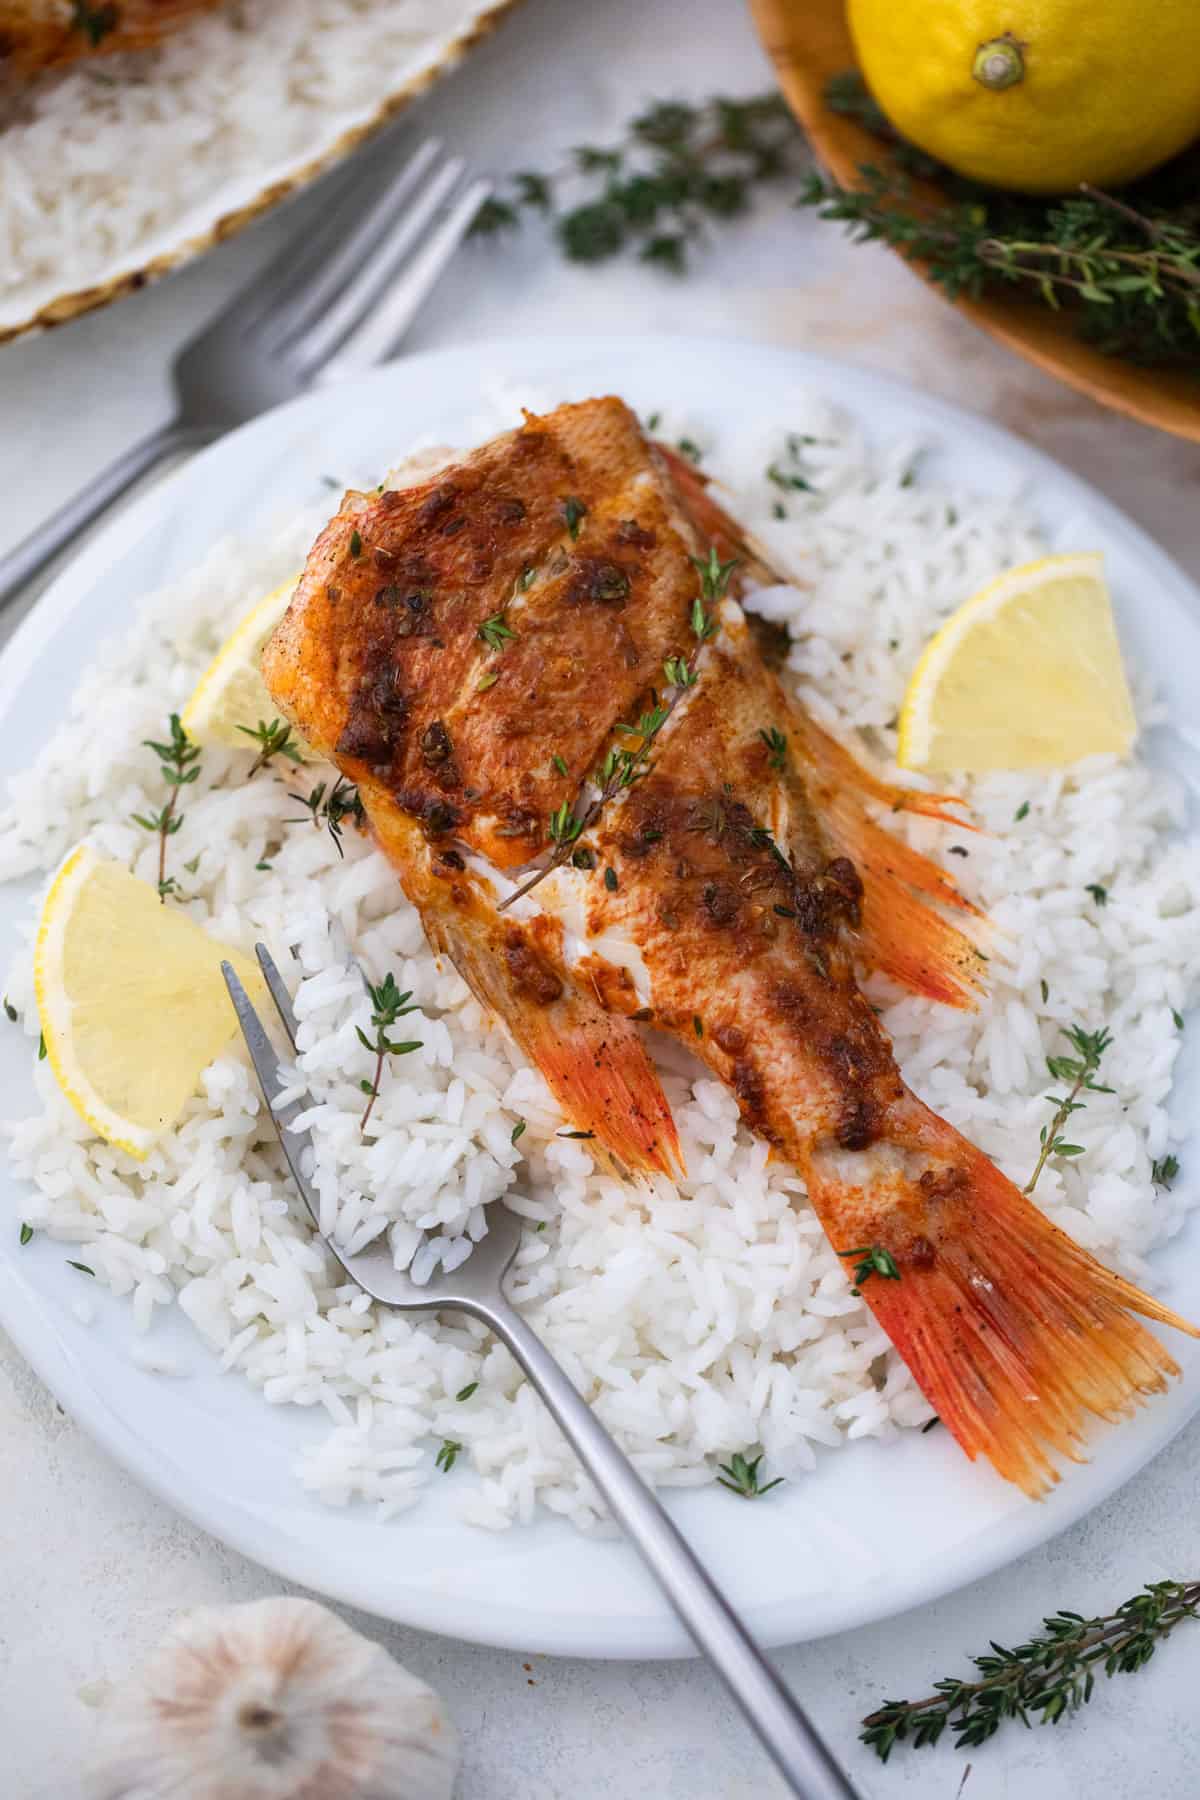 A baked fish on a bed of white rice.